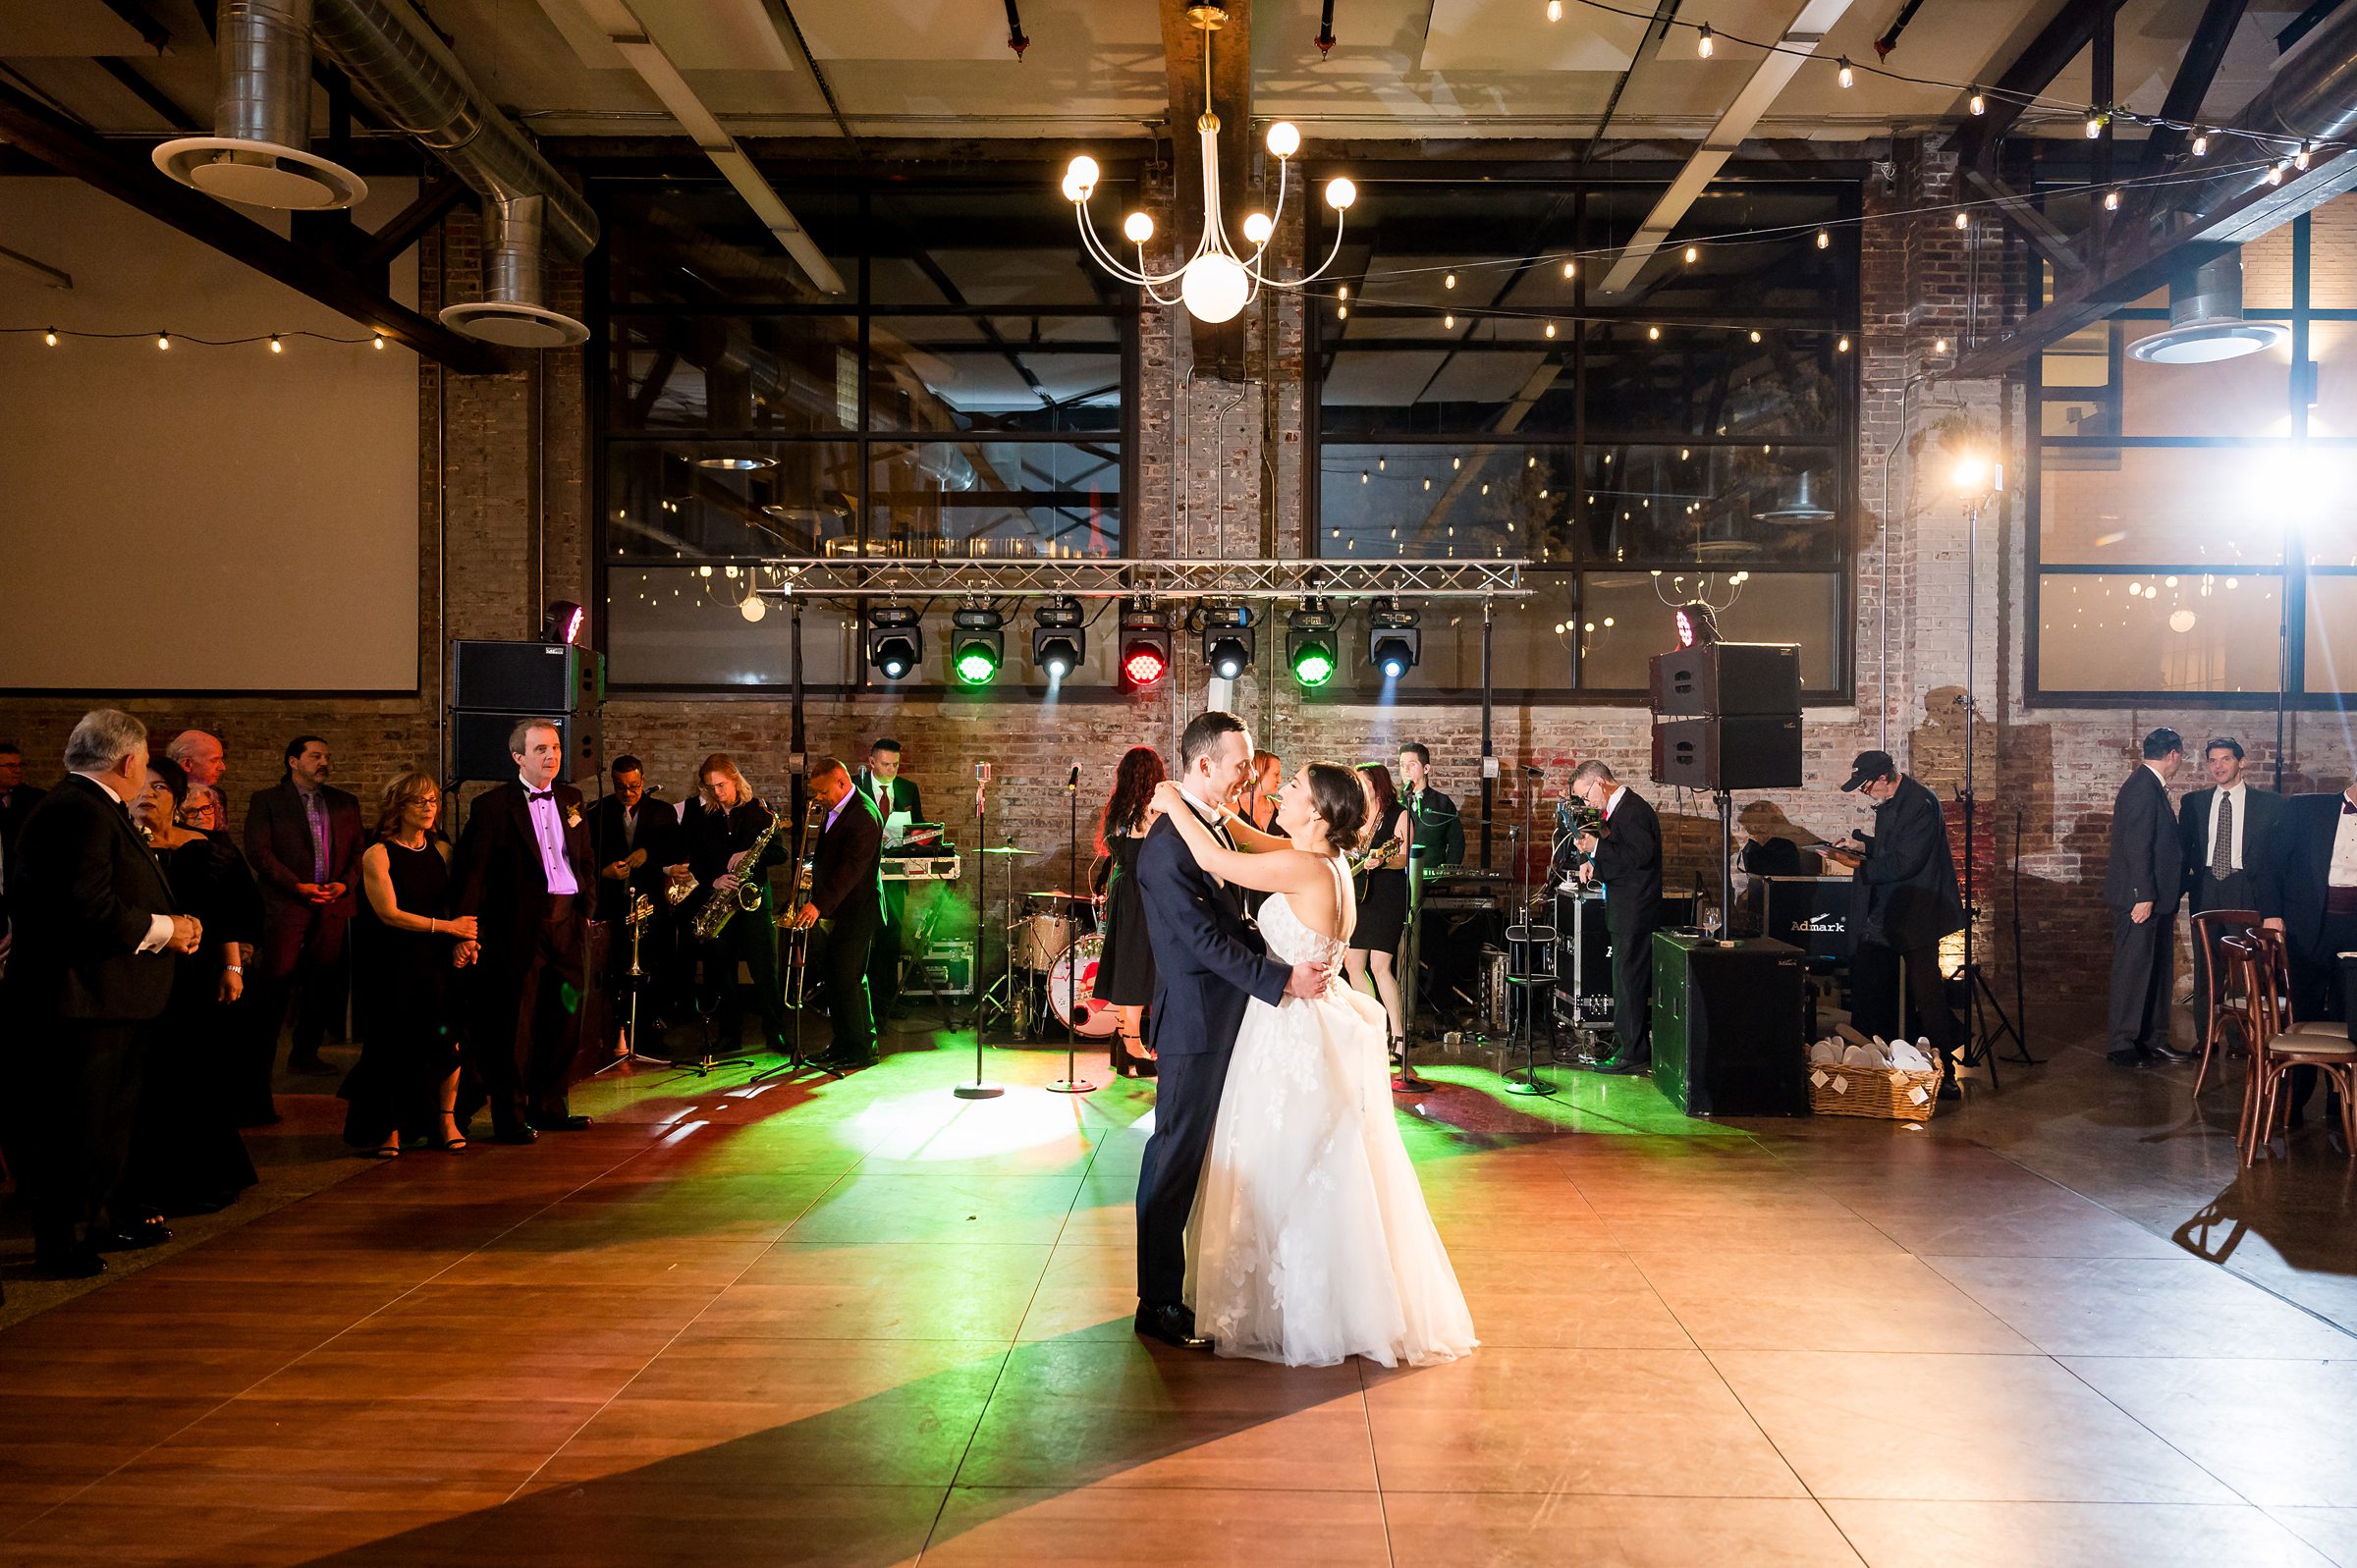 At a Lilah Events wedding, the bride and groom share their first dance at the reception.